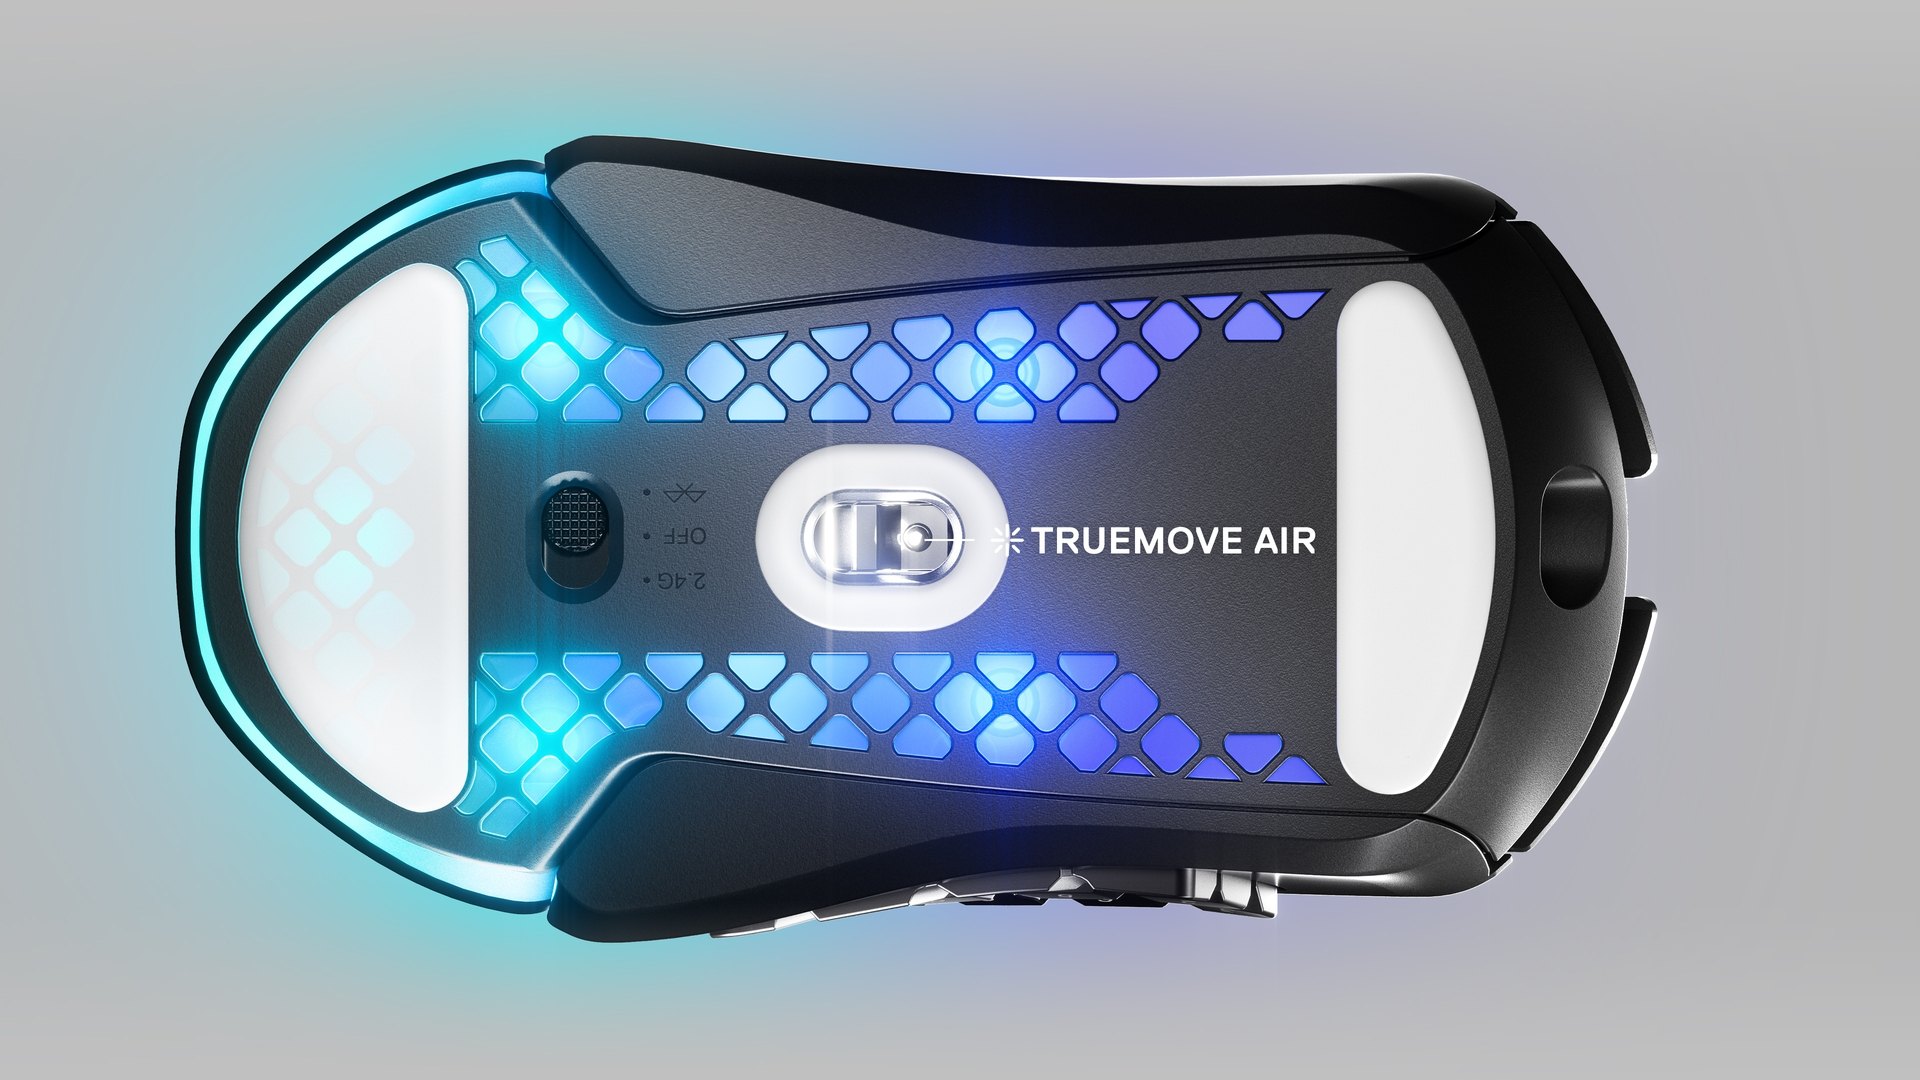 An Aerox 9 Wireless mouse shown from beneath with a great view into the sensor and bottom glide skates of the mouse. Text with an arrow pointing to the sensor reads "Truemove Air".